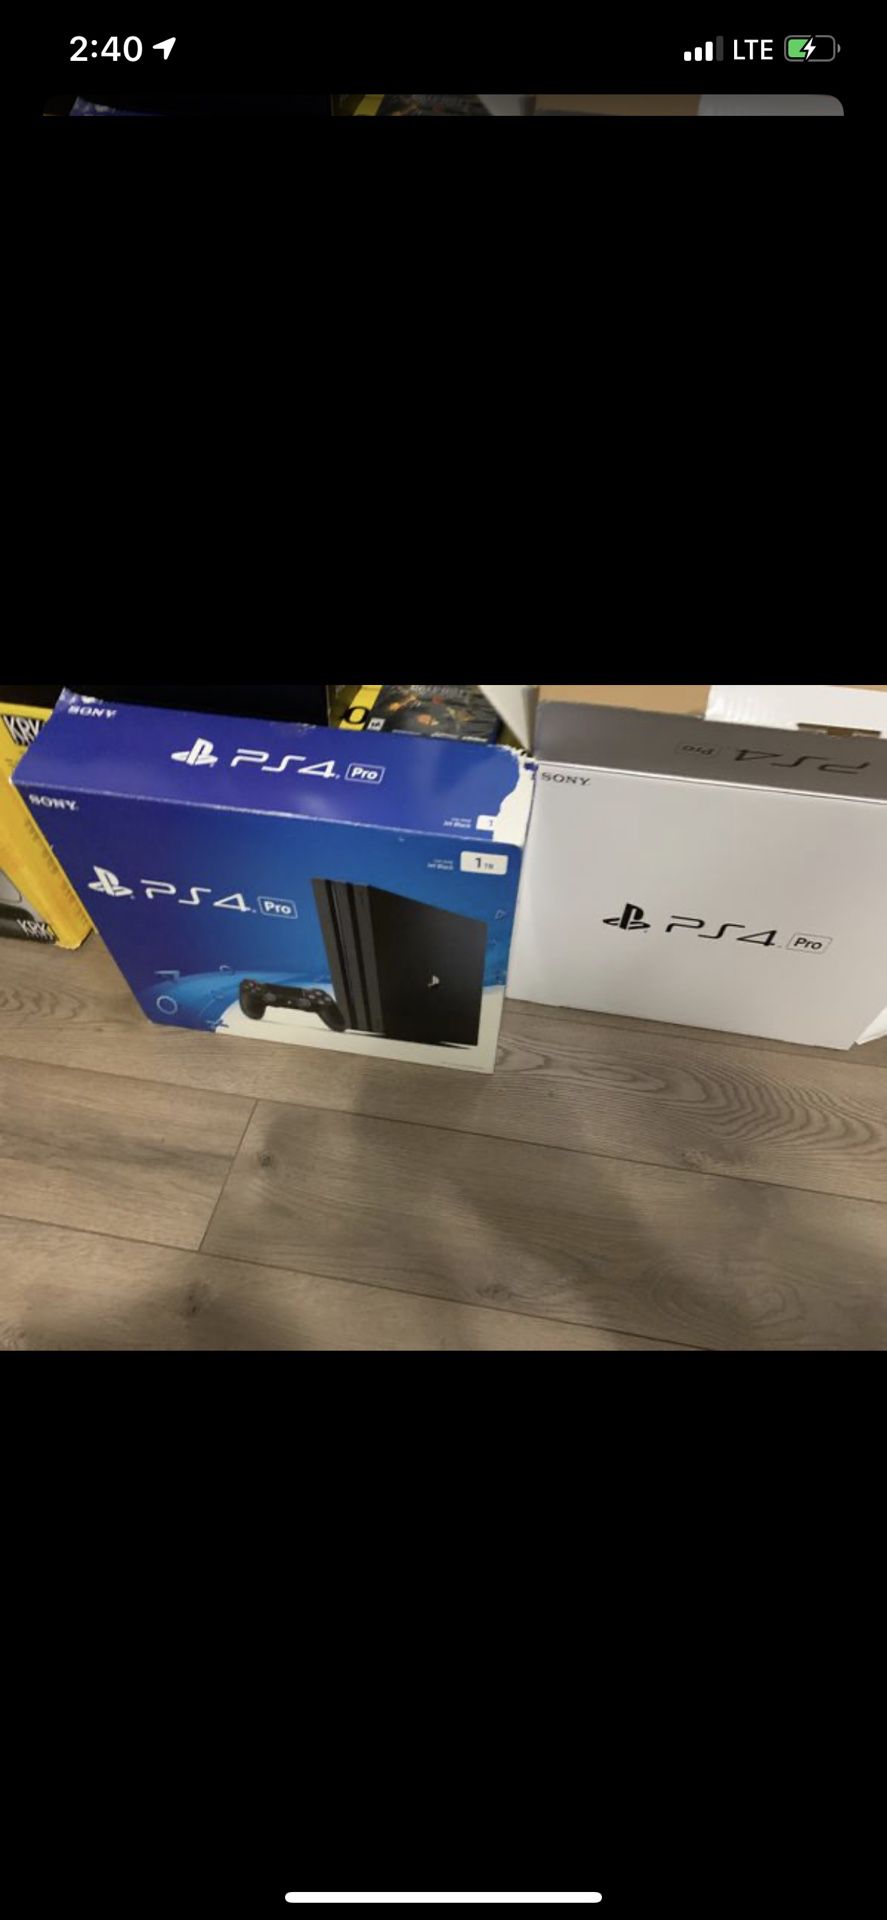 Sony Ps4 a Pro 1TB with Call of duty IIII